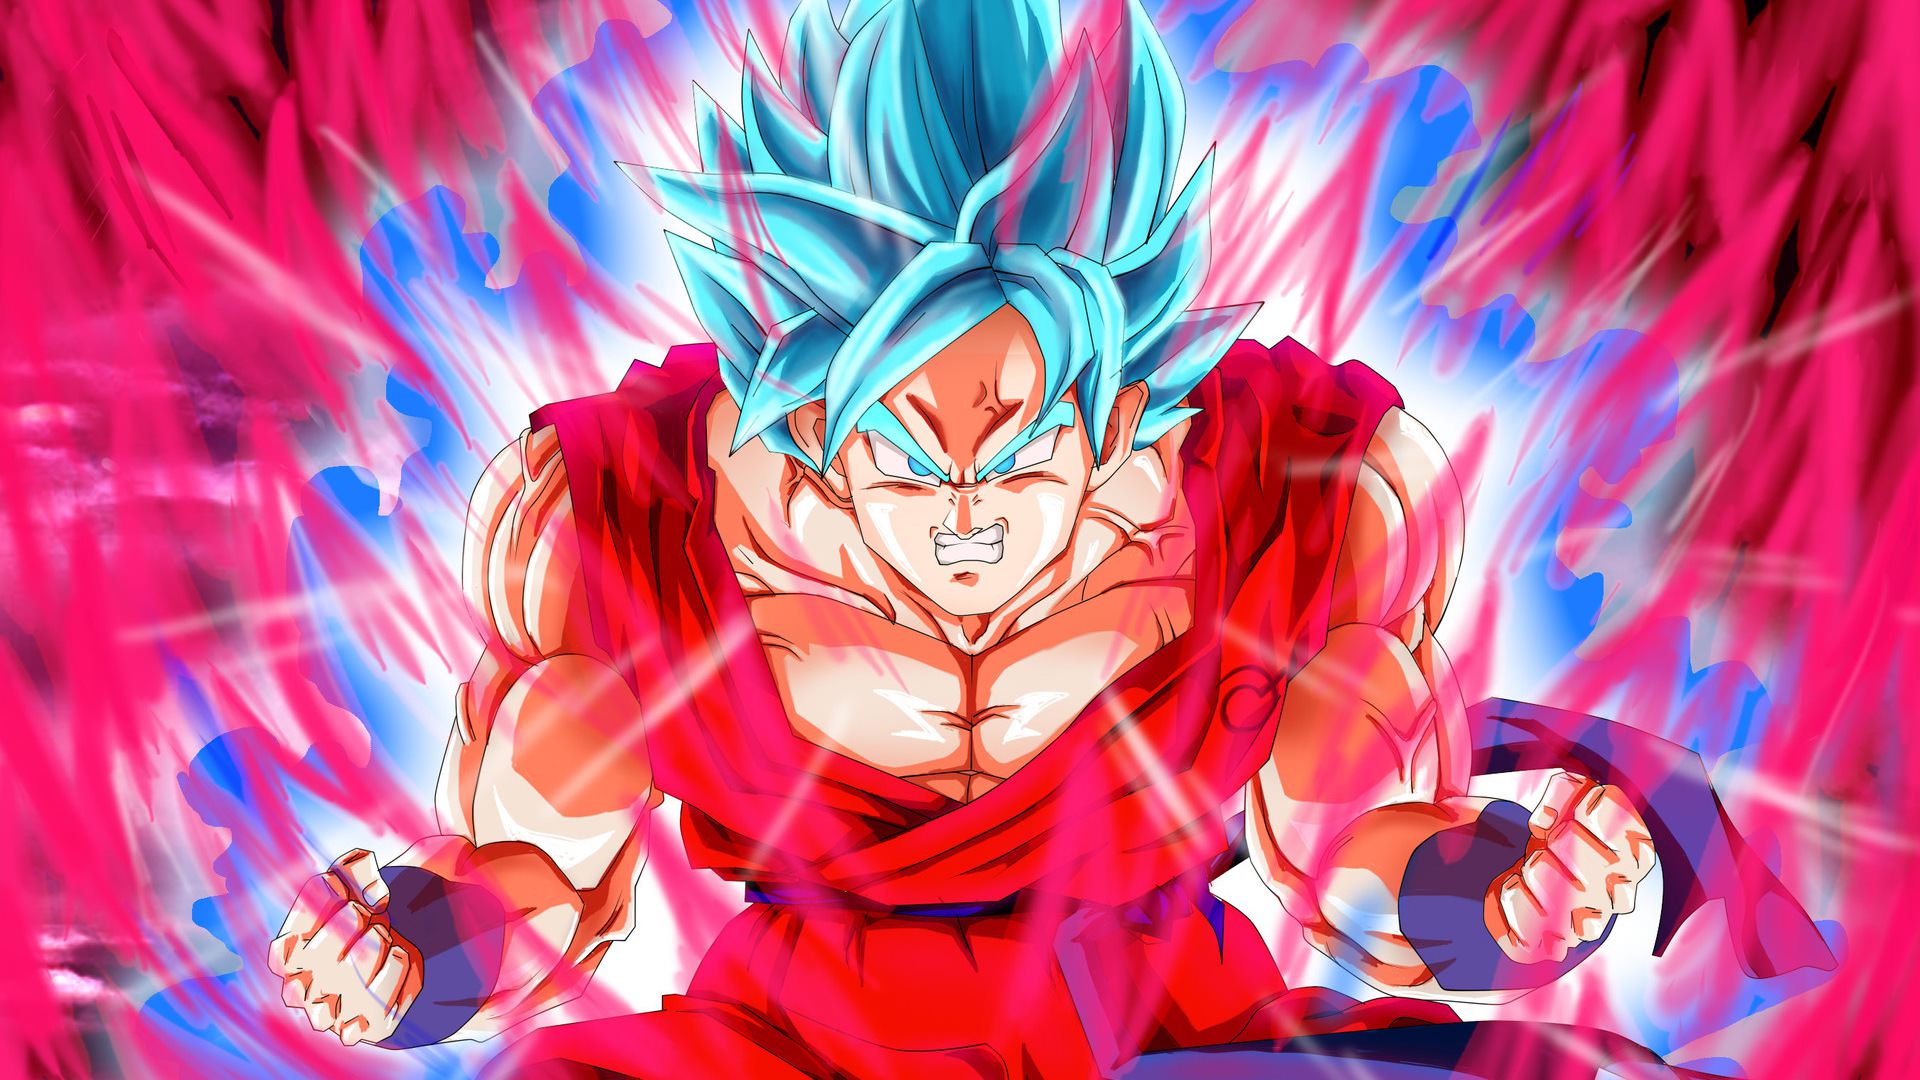 Red And Blue Goku Wallpaper & Background Beautiful Best Available For Download Red And Blue Goku Photo Free On Zicxa.com Image